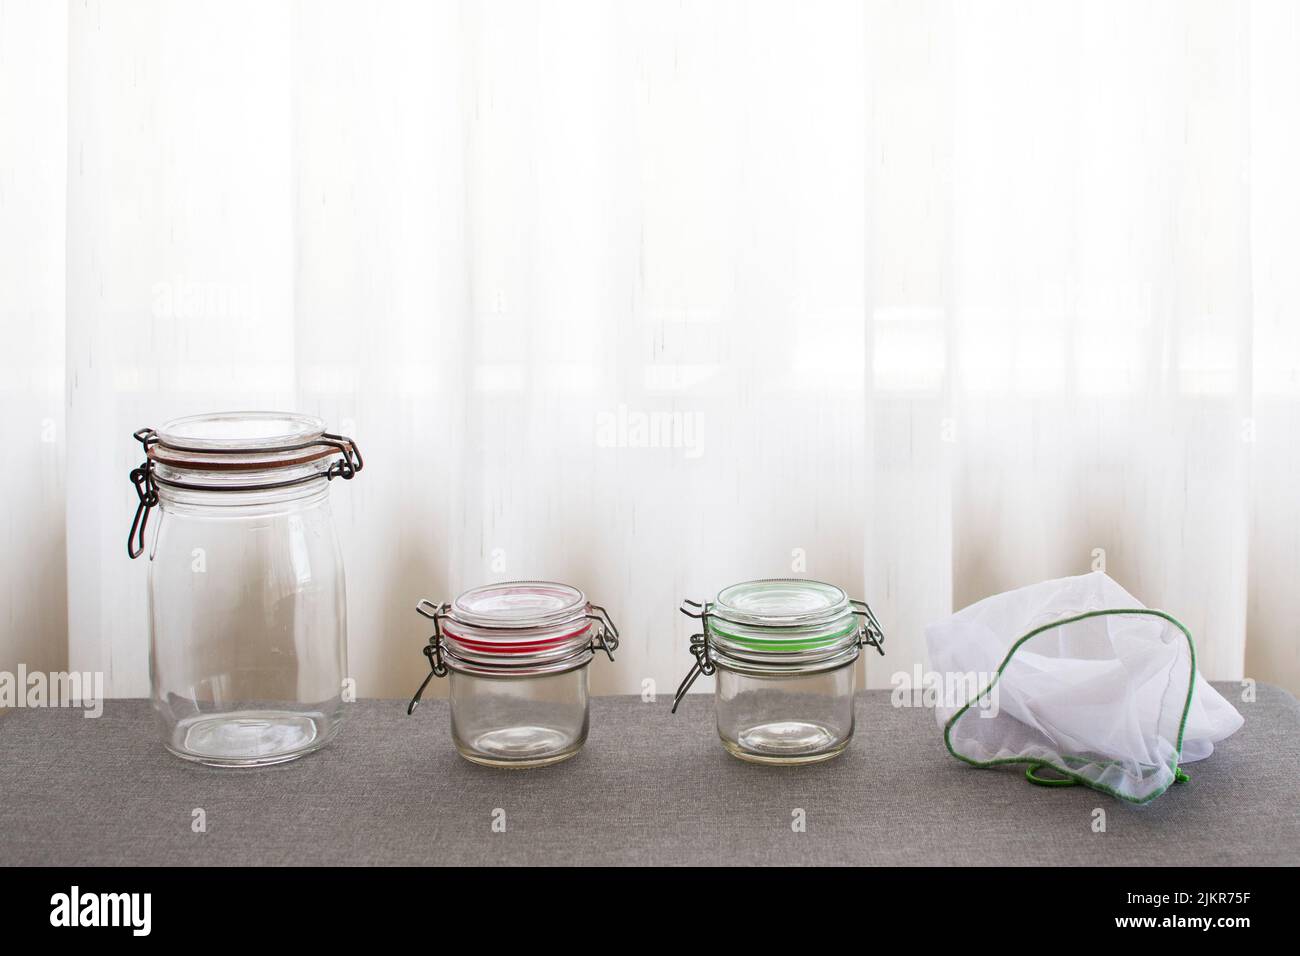 Glass jars and reusable bags for sustainable storage and shopping Stock Photo